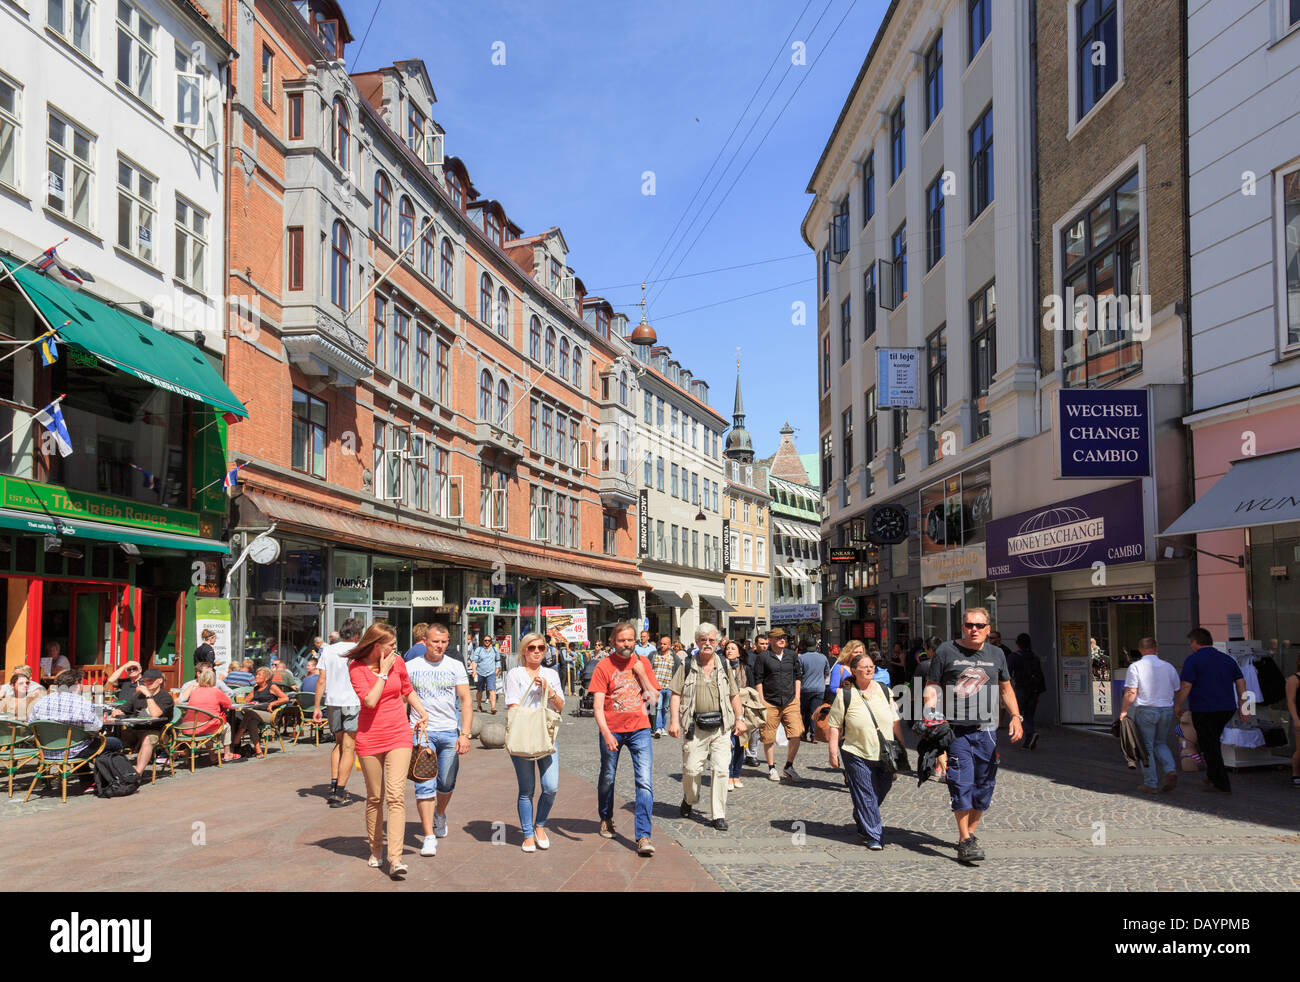 Pedestrianised shopping street in city centre busy with people, Strøget, Copenhagen, Denmark Stock Photo